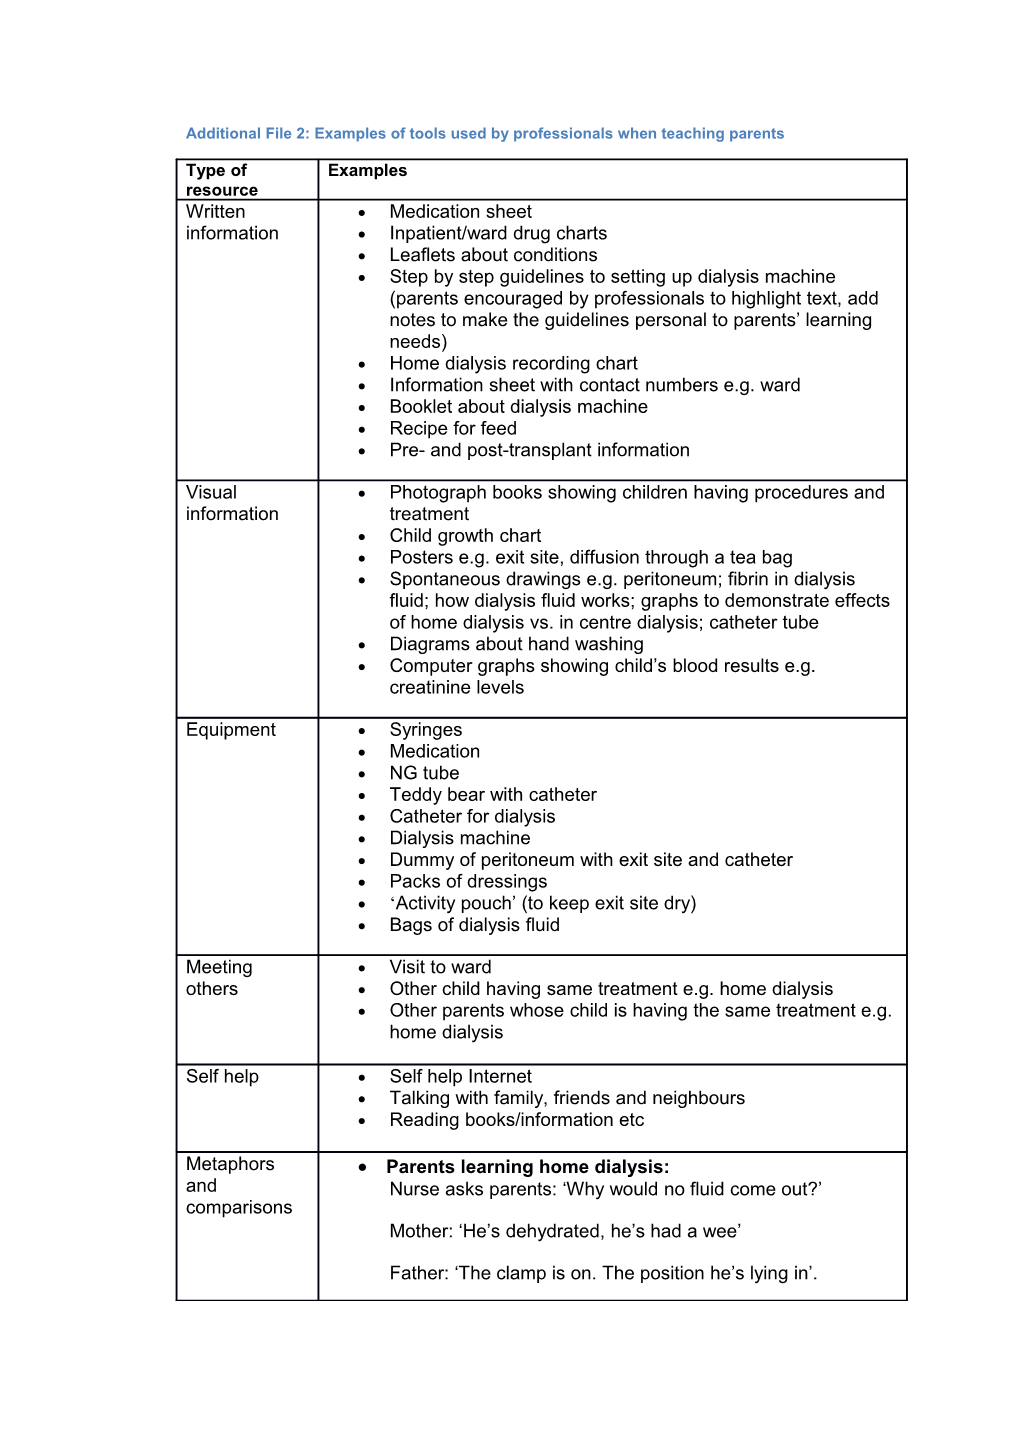 Additional File 2: Examples of Tools Used by Professionals When Teaching Parents